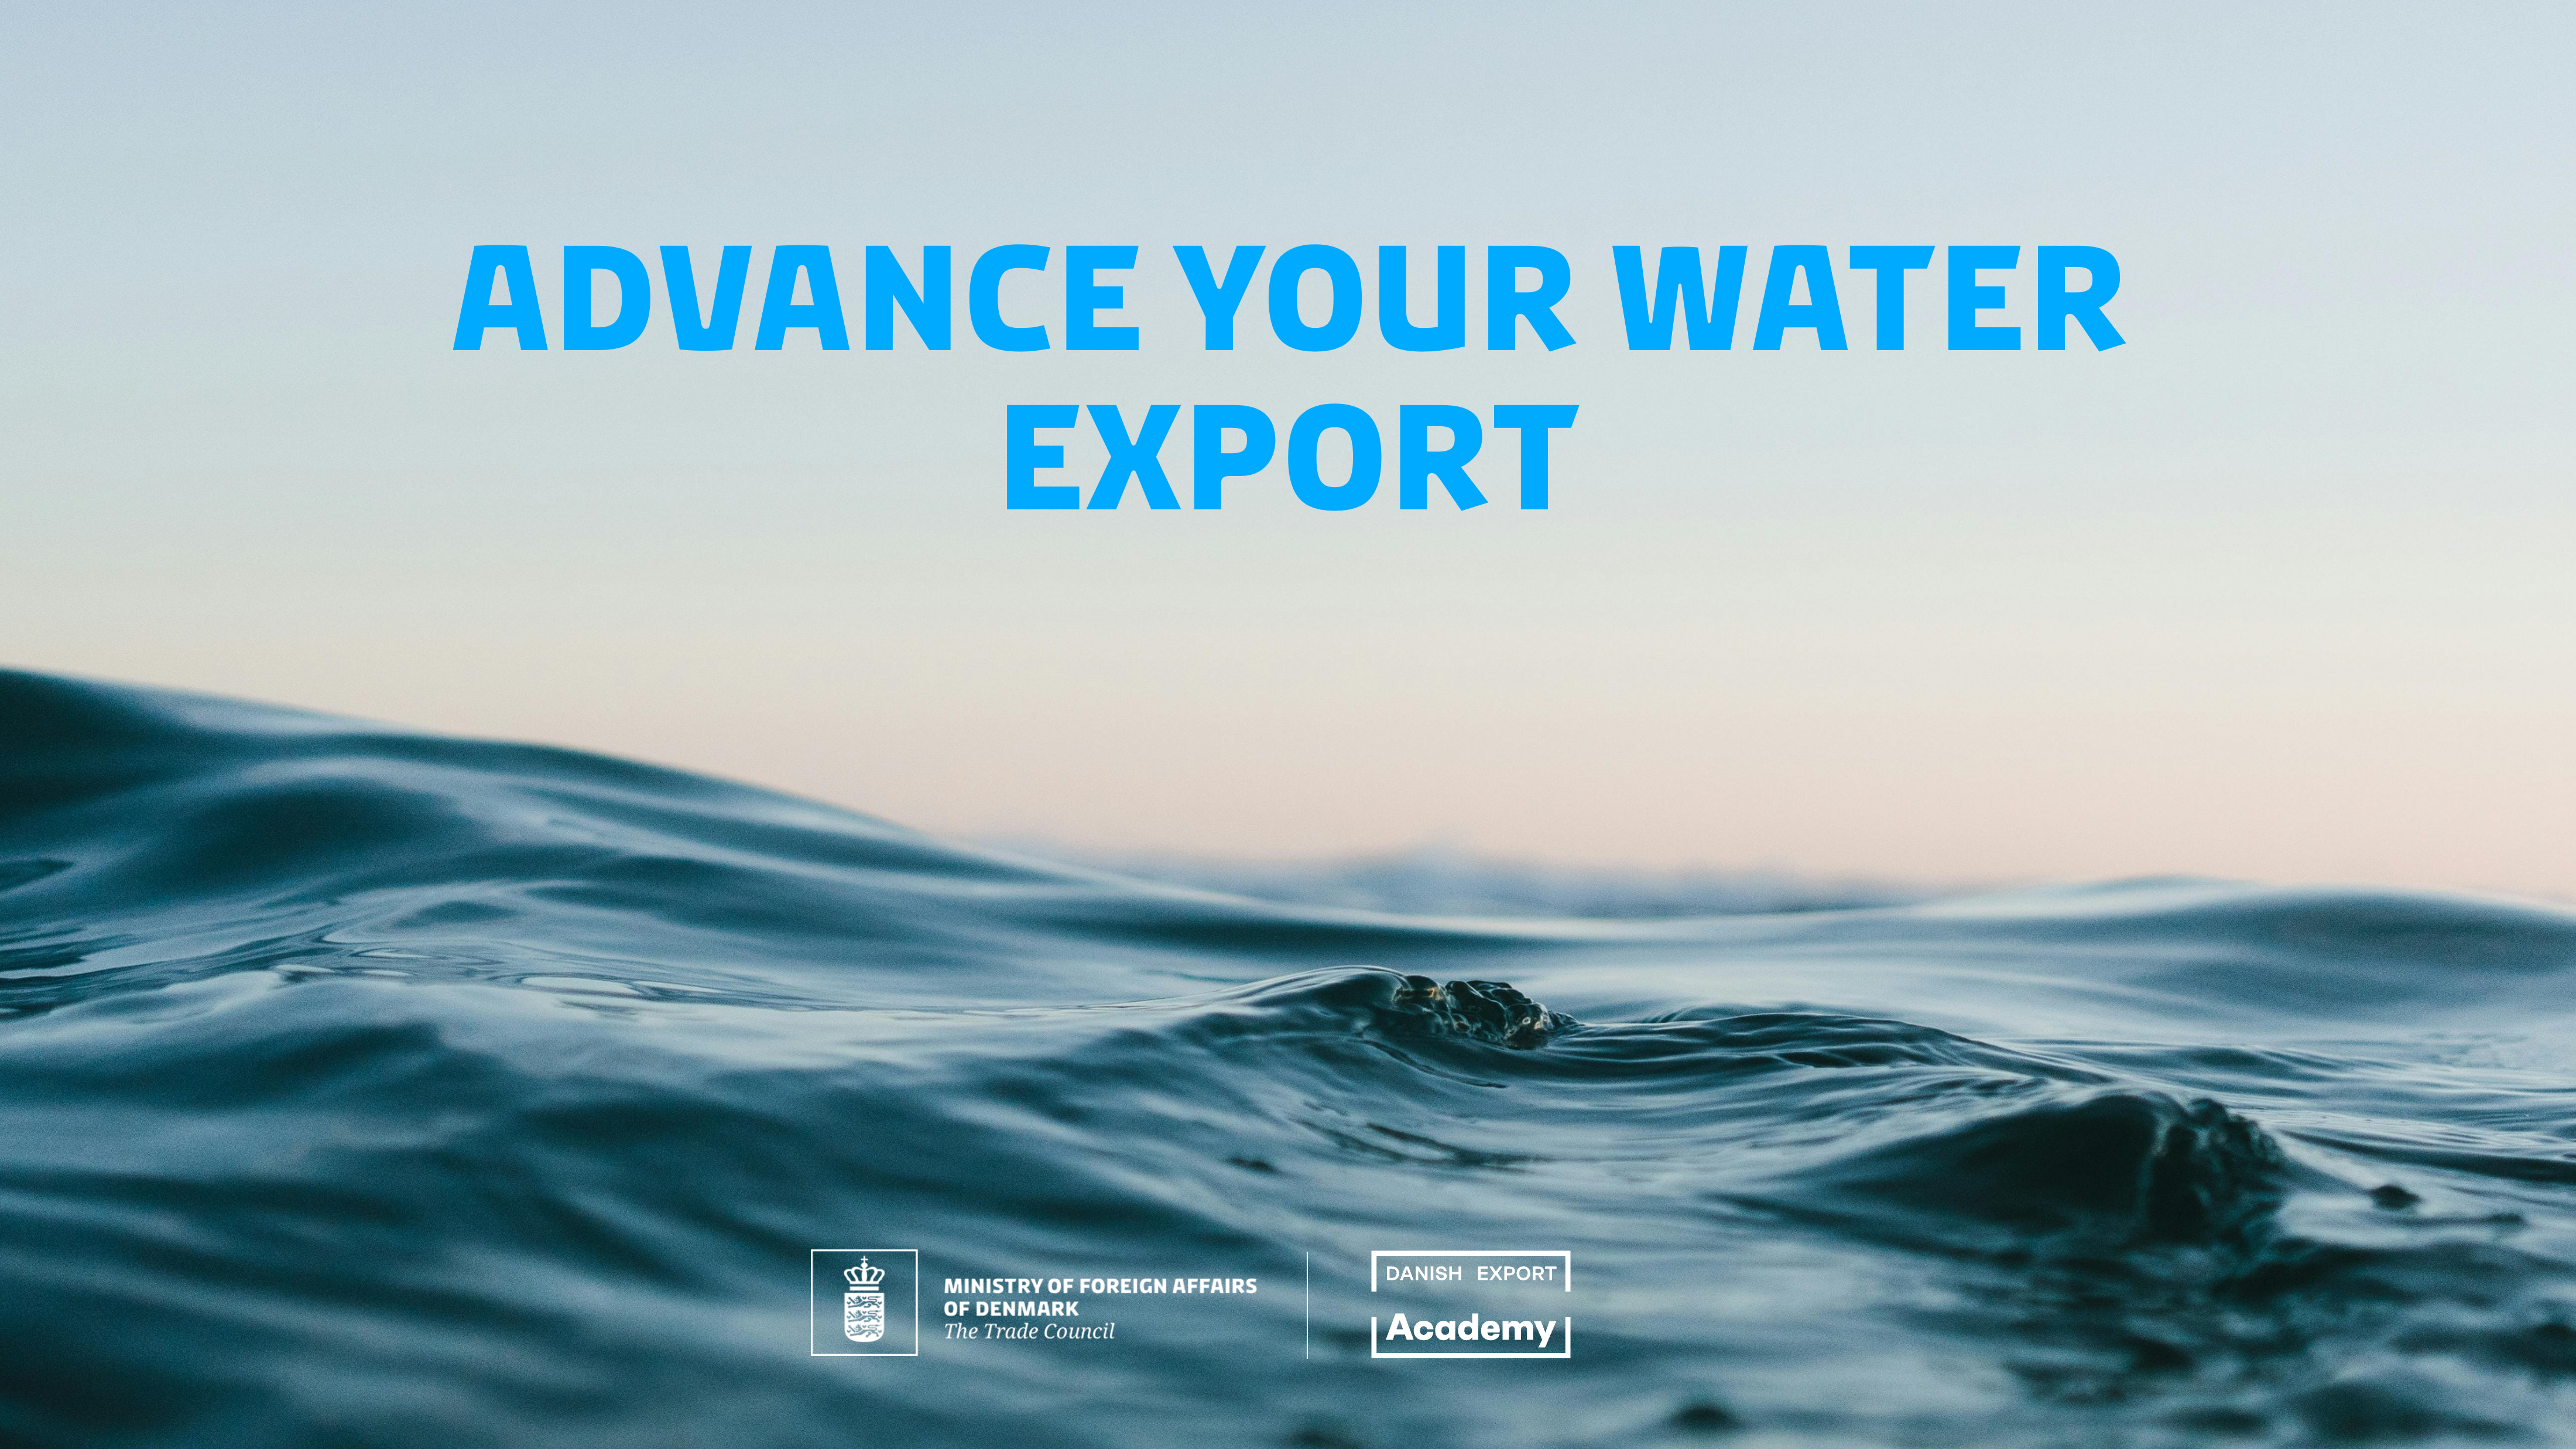 Advance Your Water Export